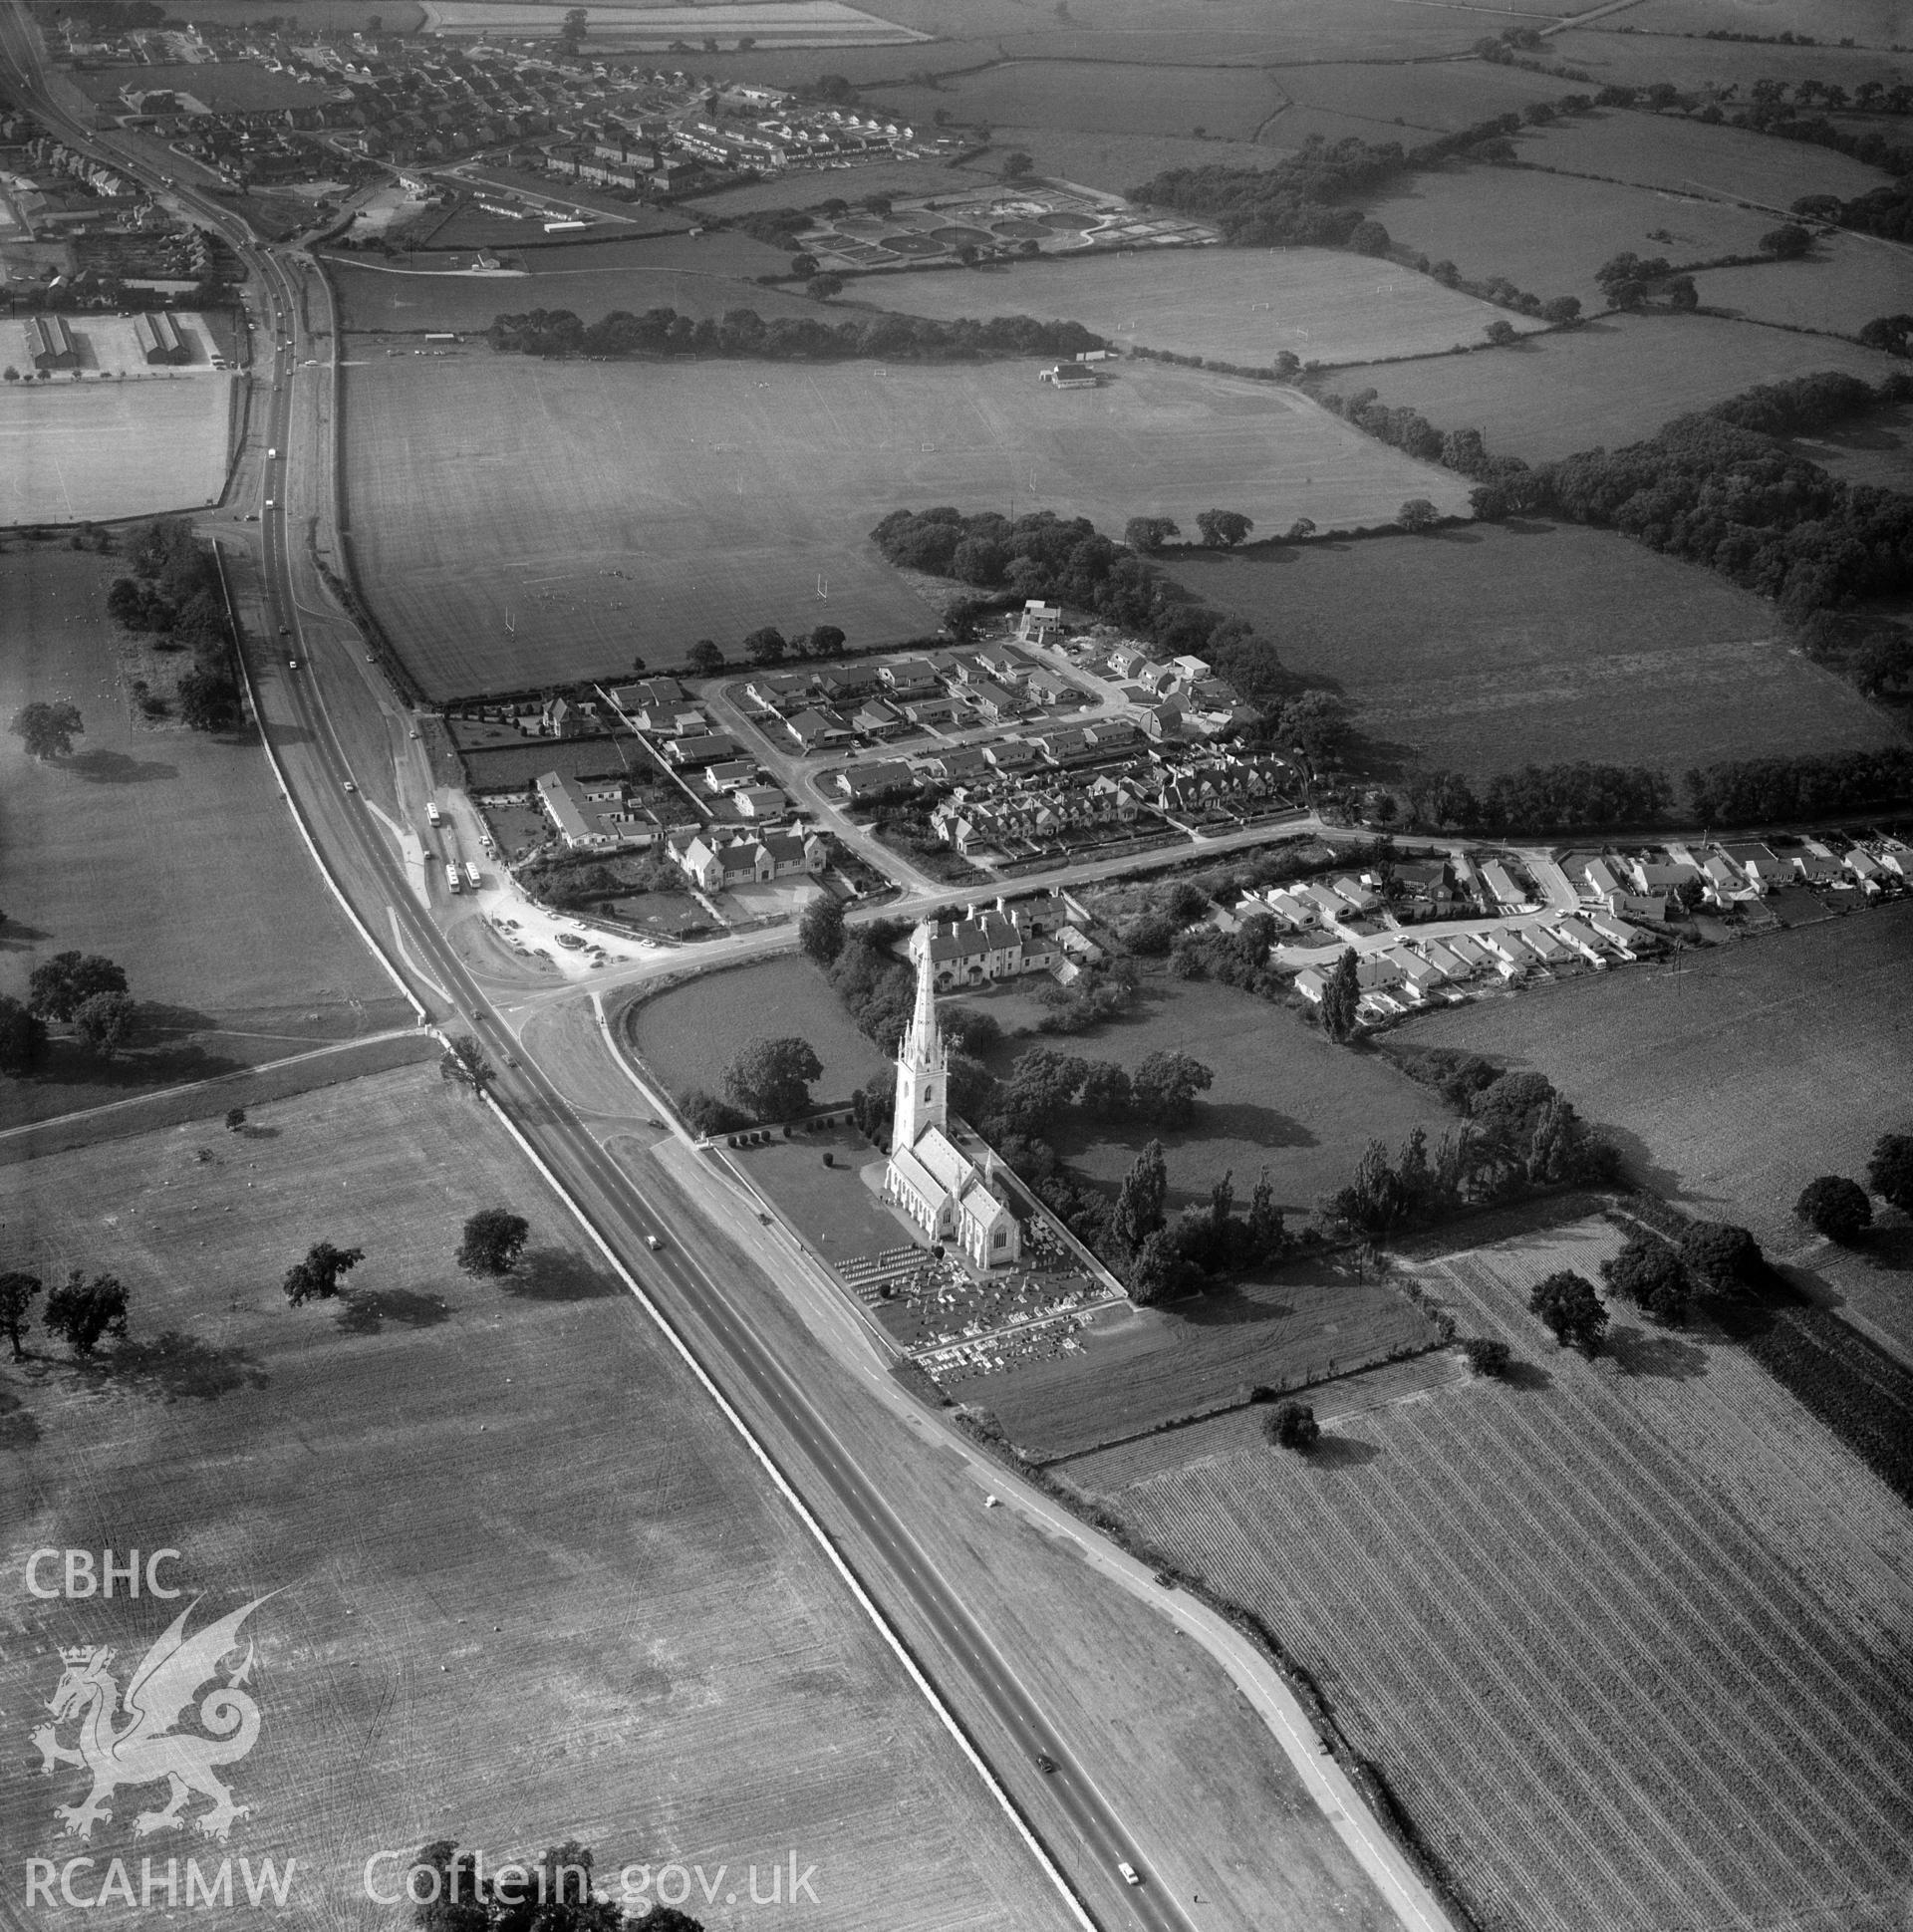 Digital copy of a black and white, oblique aerial photograph of the Marble Church, Bodelwyddan. The photograph shows a view from the South East. The serried gravestones of the Canadian soldiers killed in the 1919 riot at nearby Kinmel Military Camp are clearly visible in the Churchyard.